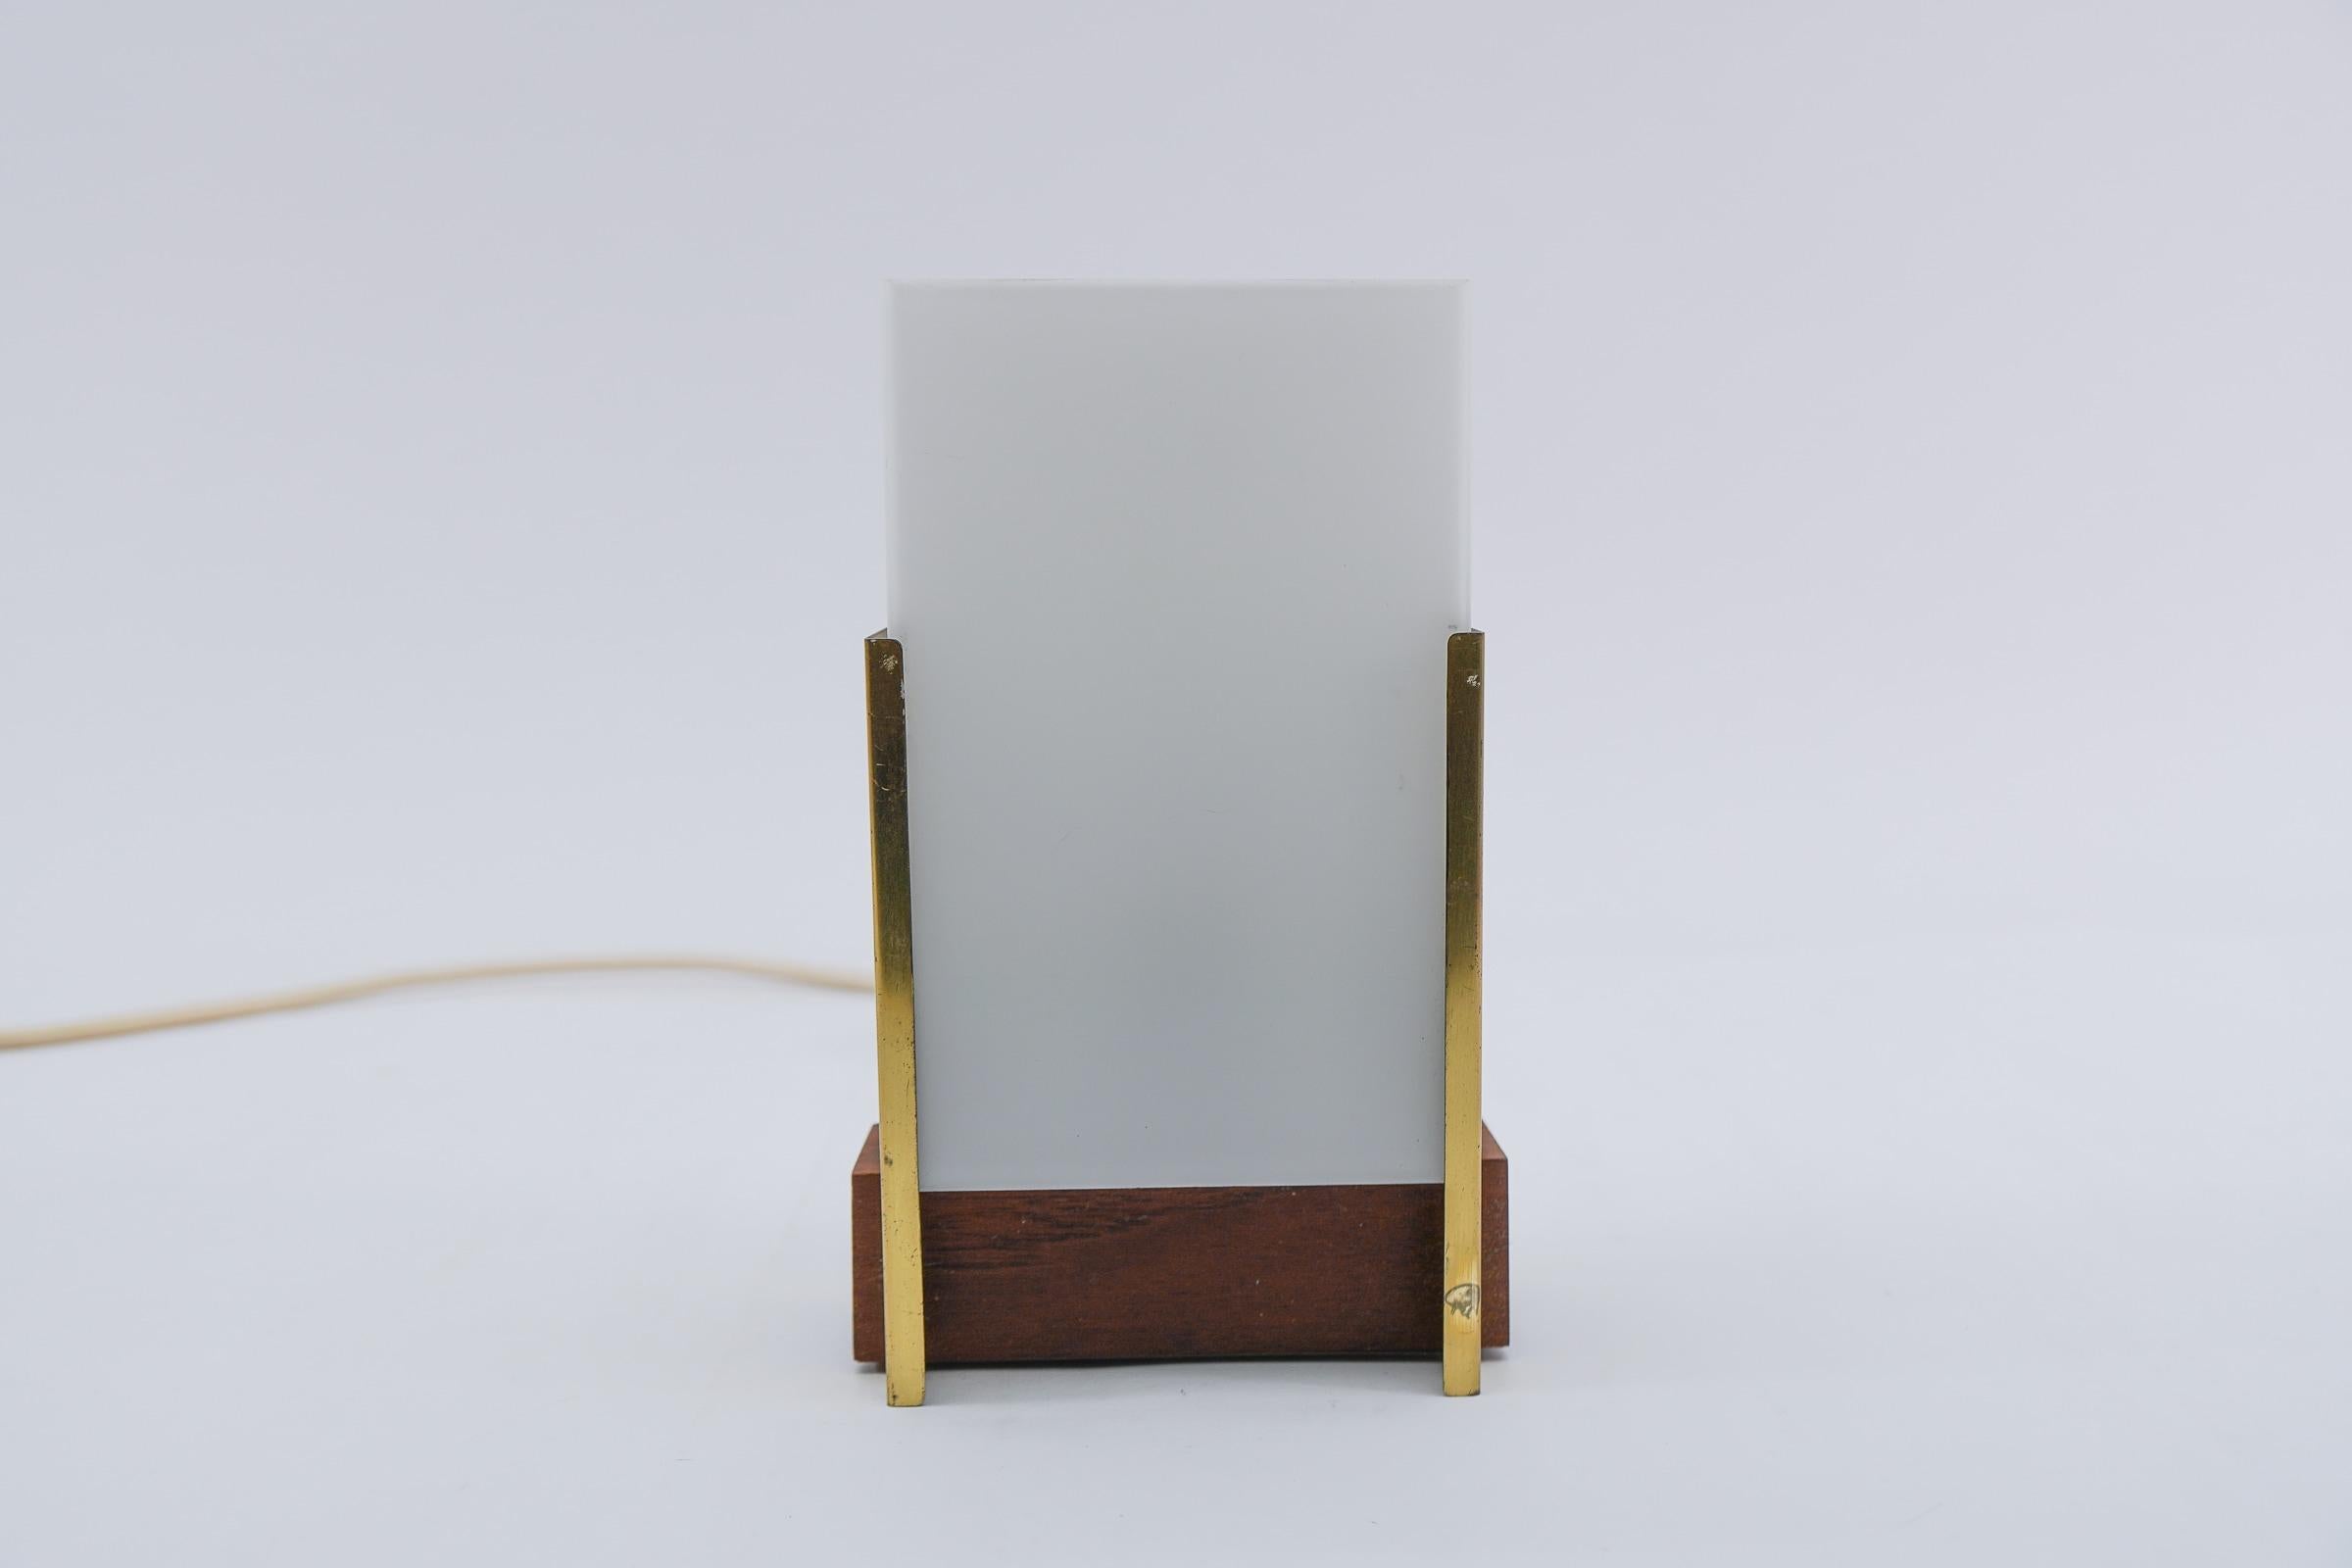 Scandinavian Table Lamp Made in Teak, Opal Glass and Brass, 1960s For Sale 2